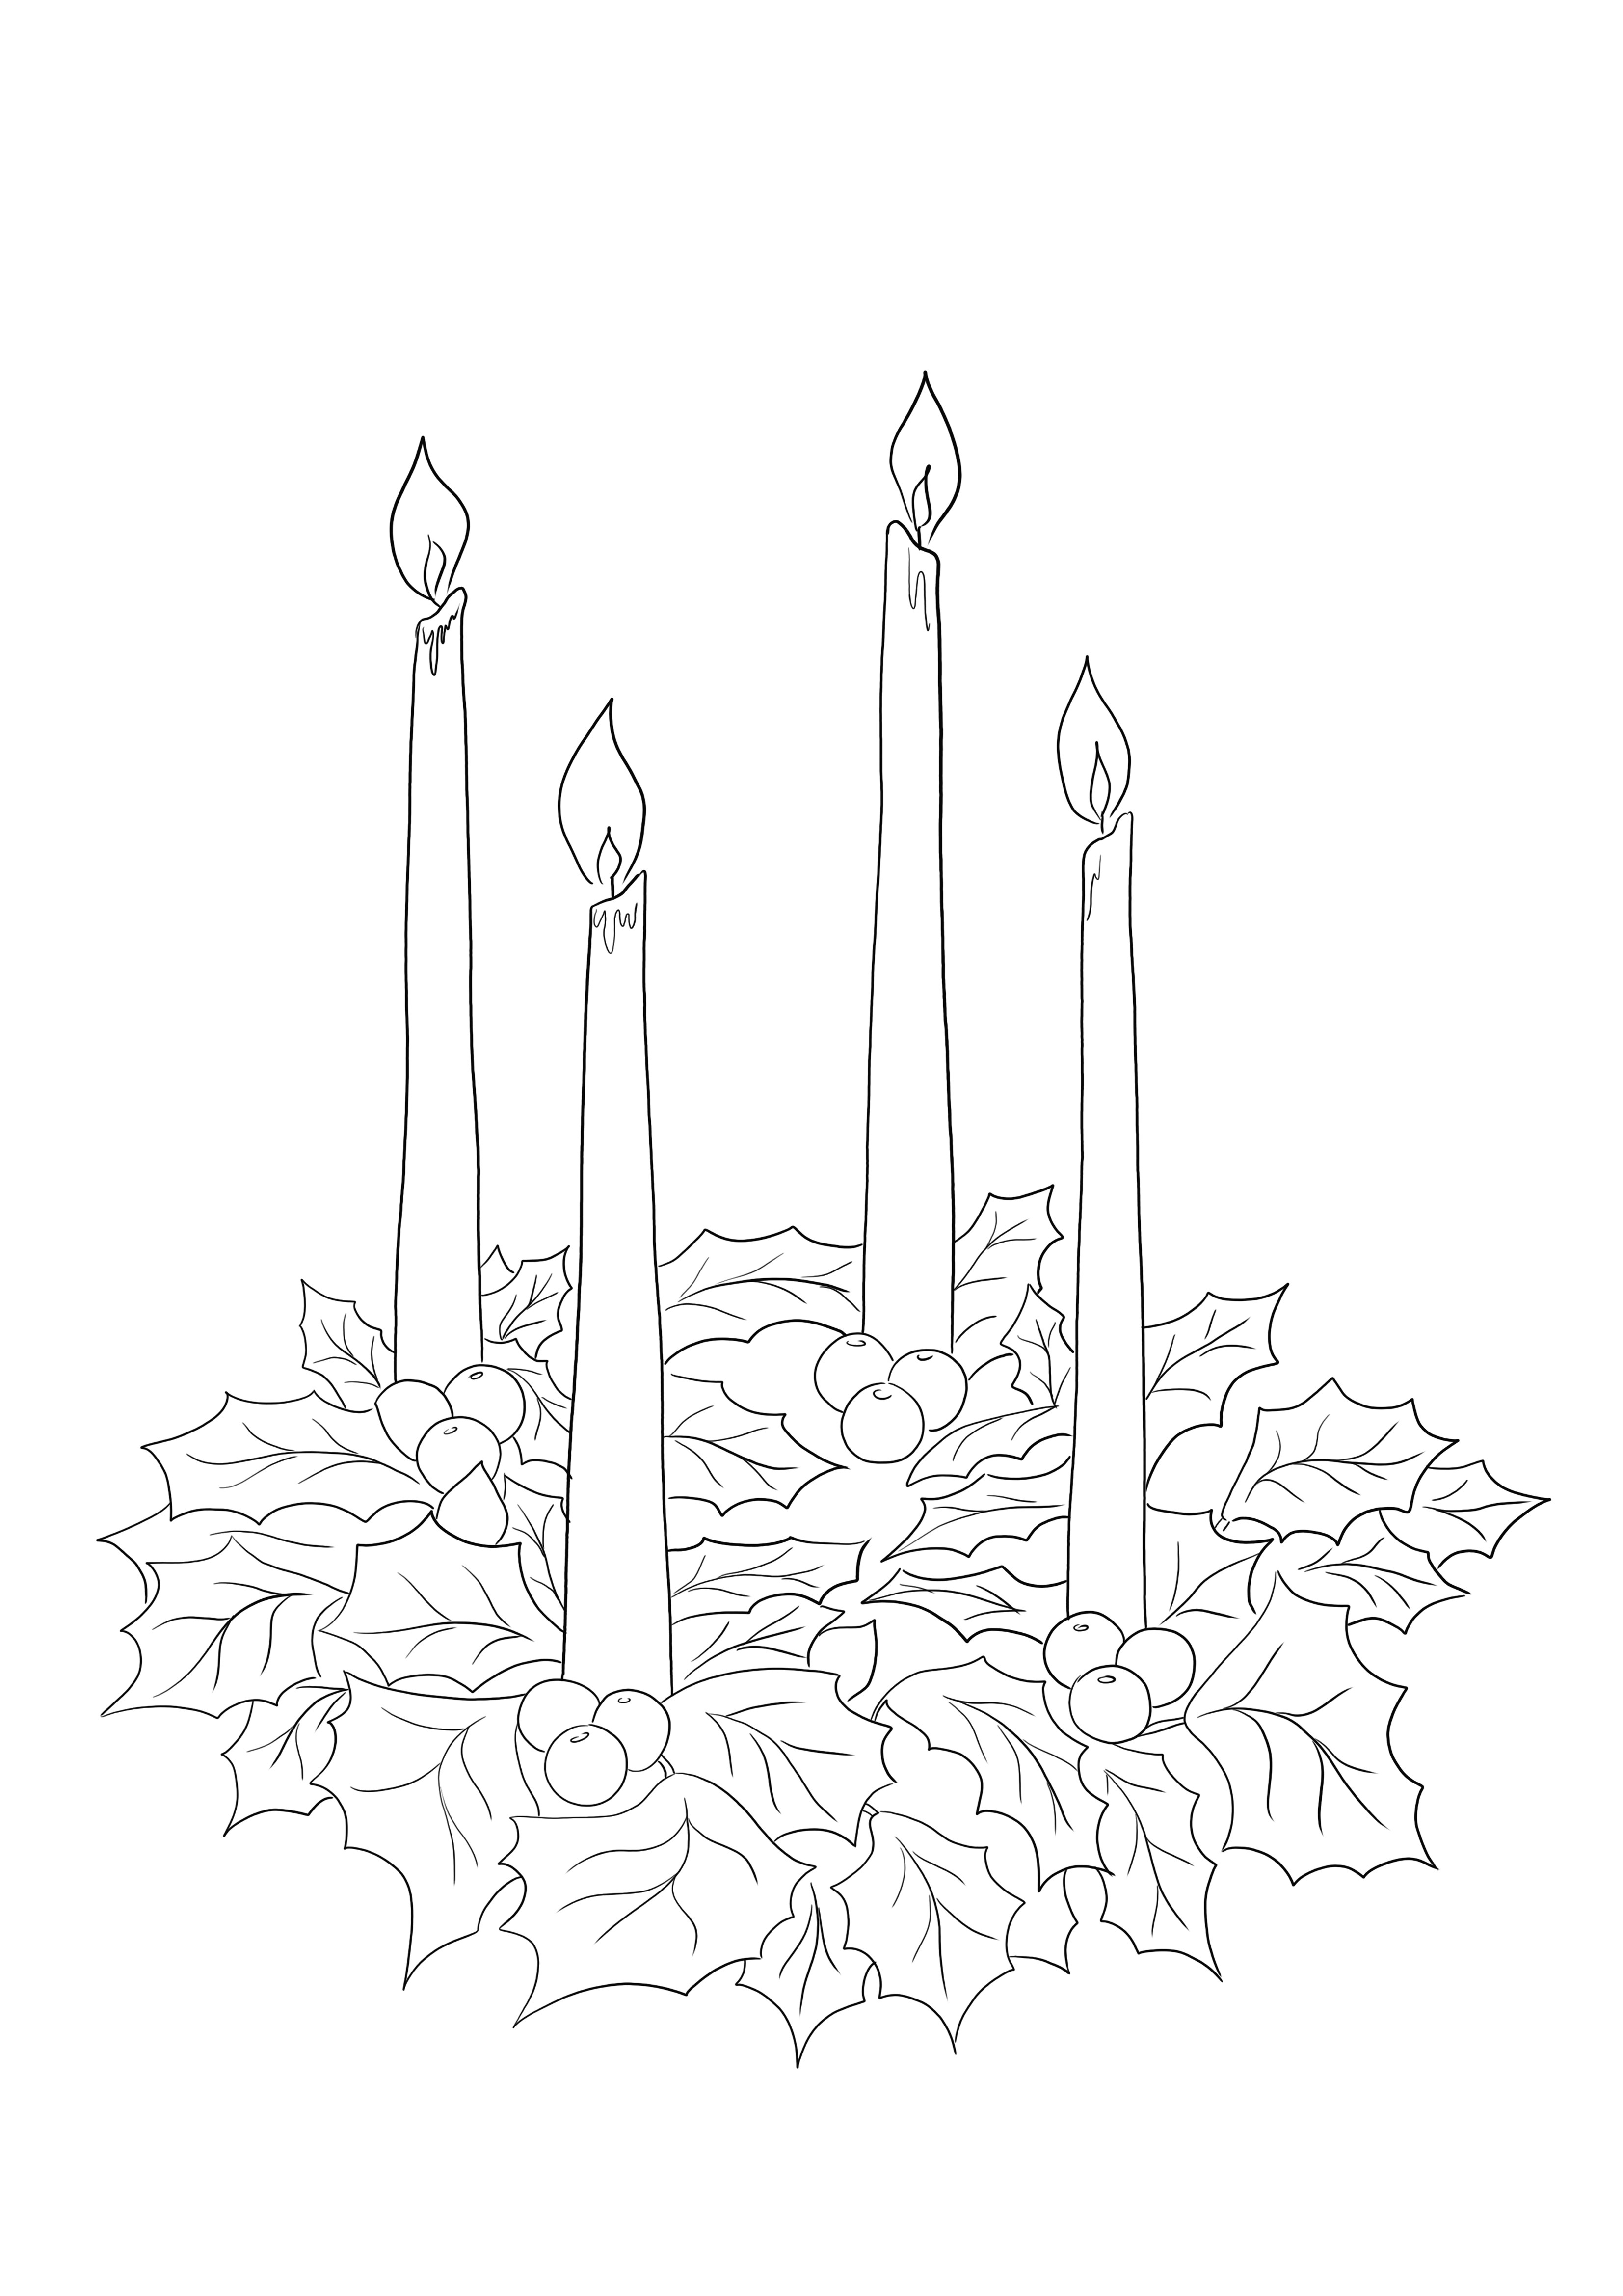 Here is a beautiful Advent Wreath coloring image free to download or print